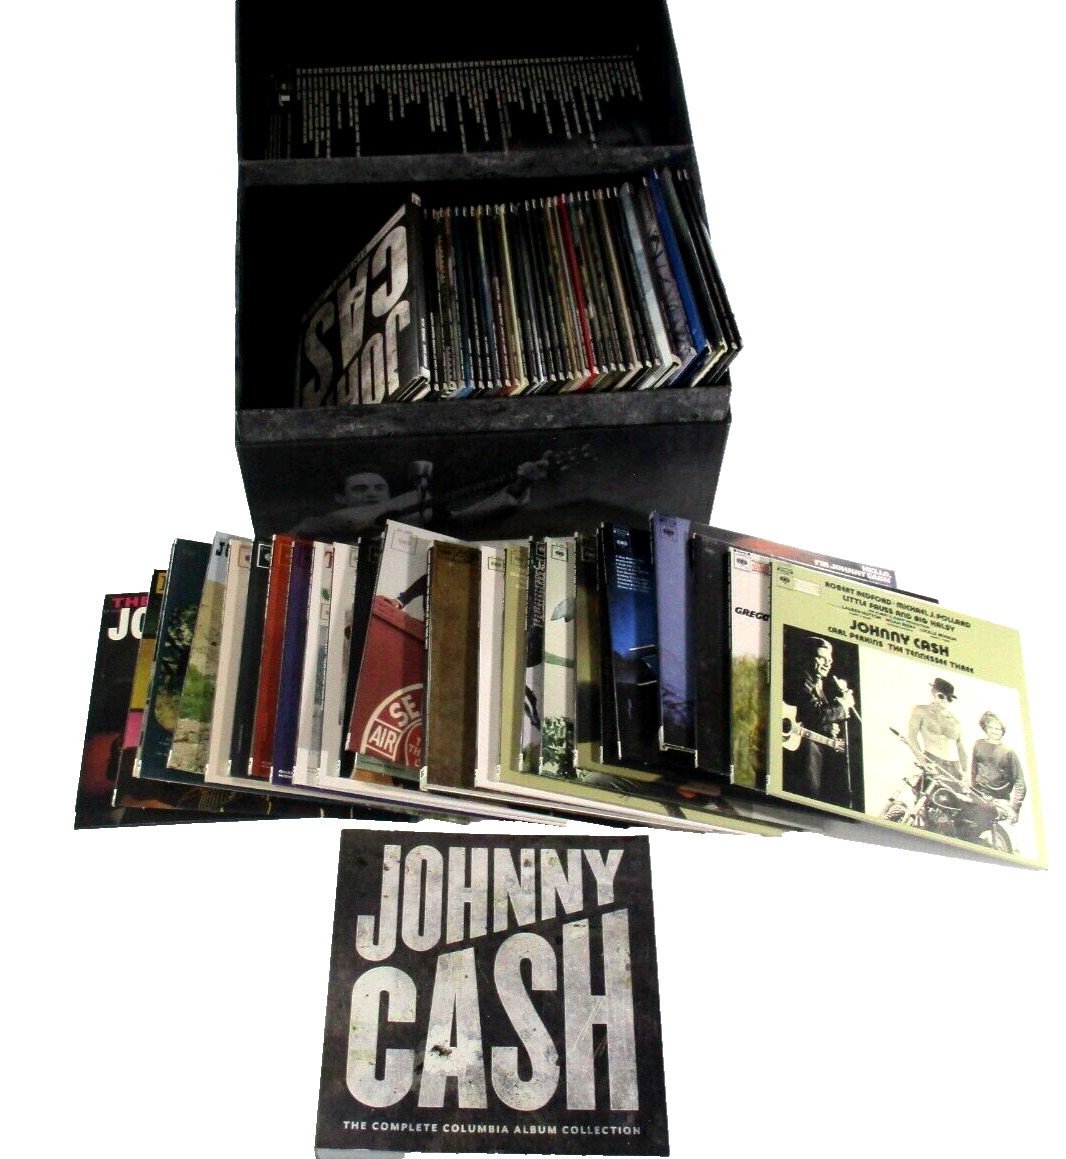 Johnny Cash The Complete Columbia Album Collection Boxset 63 Albums 2012 Sony VG